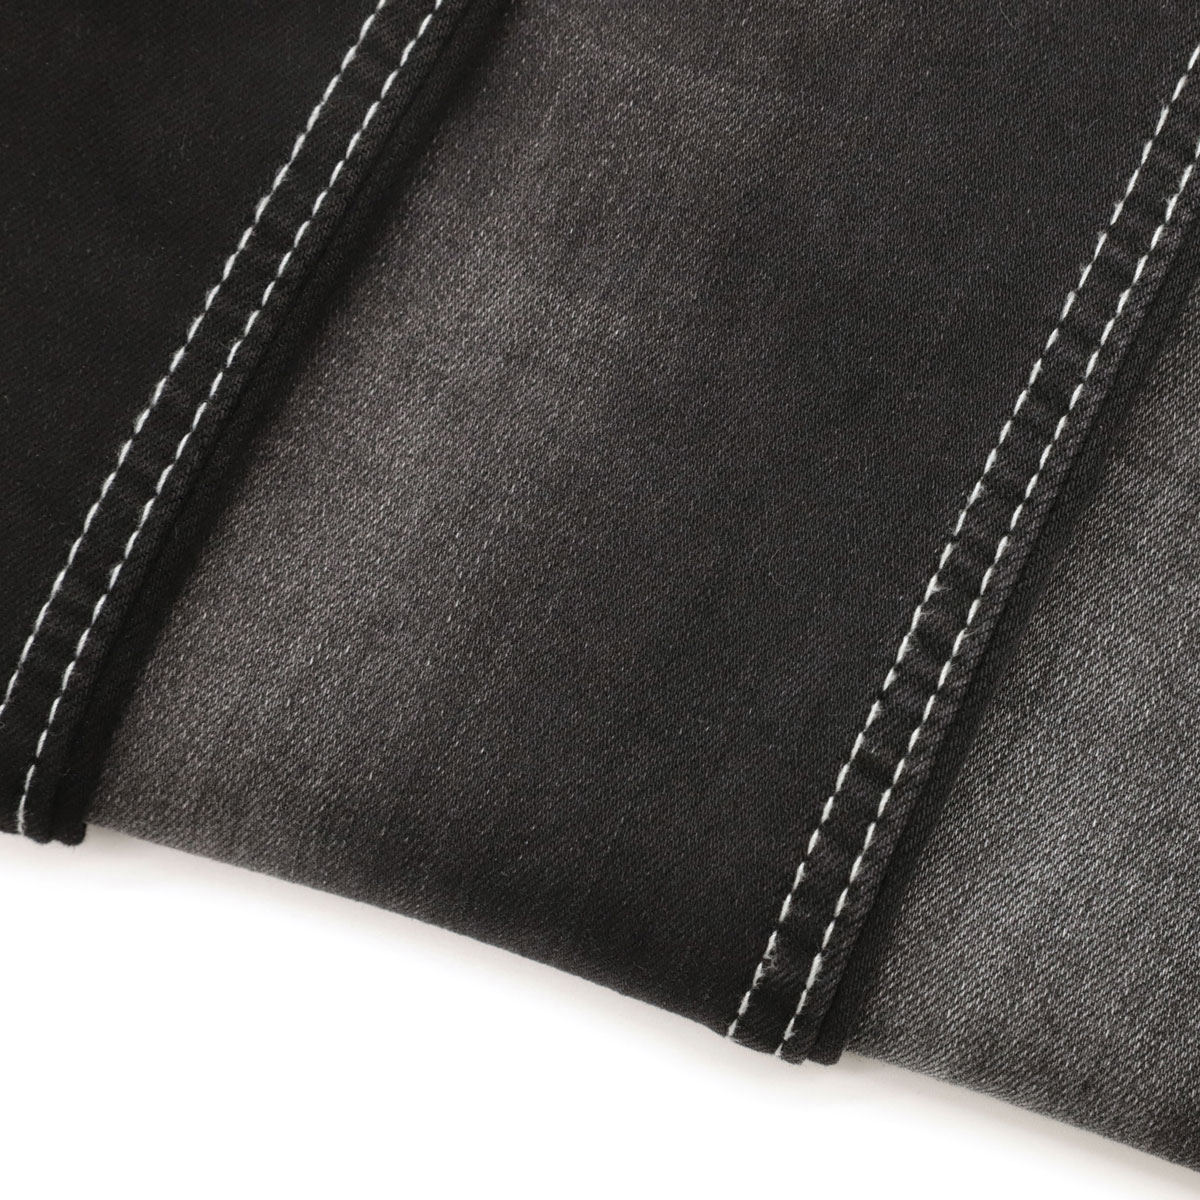 Twill Denim Fabric Quality Affected by What Factors 2